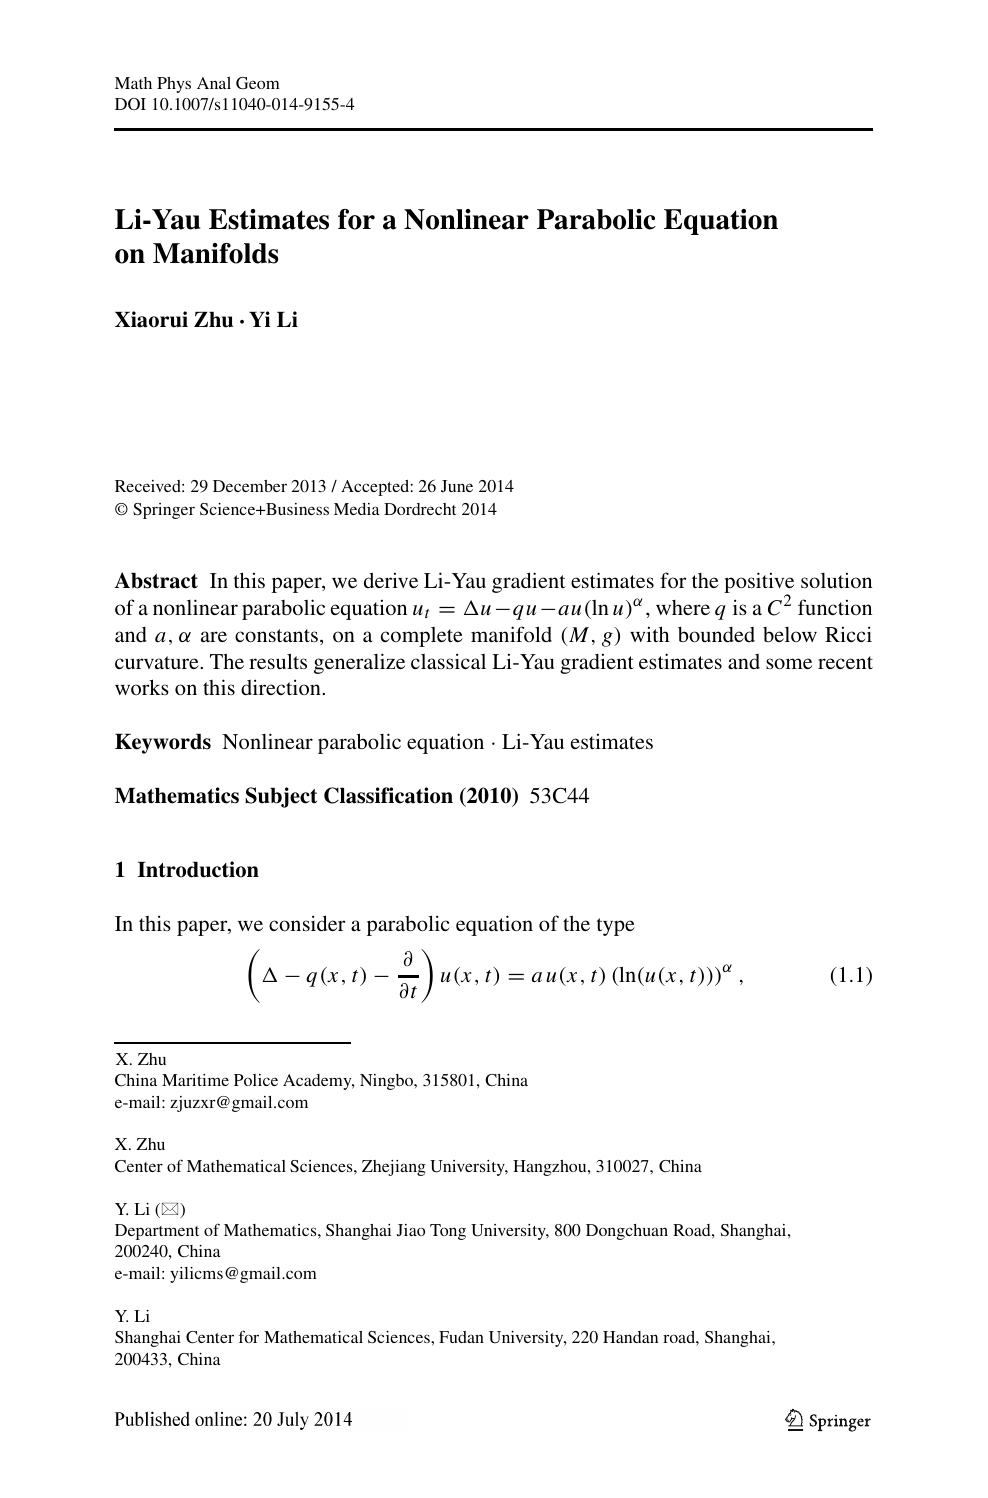 Li Yau Estimates For A Nonlinear Parabolic Equation On Manifolds Topic Of Research Paper In Mathematics Download Scholarly Article Pdf And Read For Free On Cyberleninka Open Science Hub